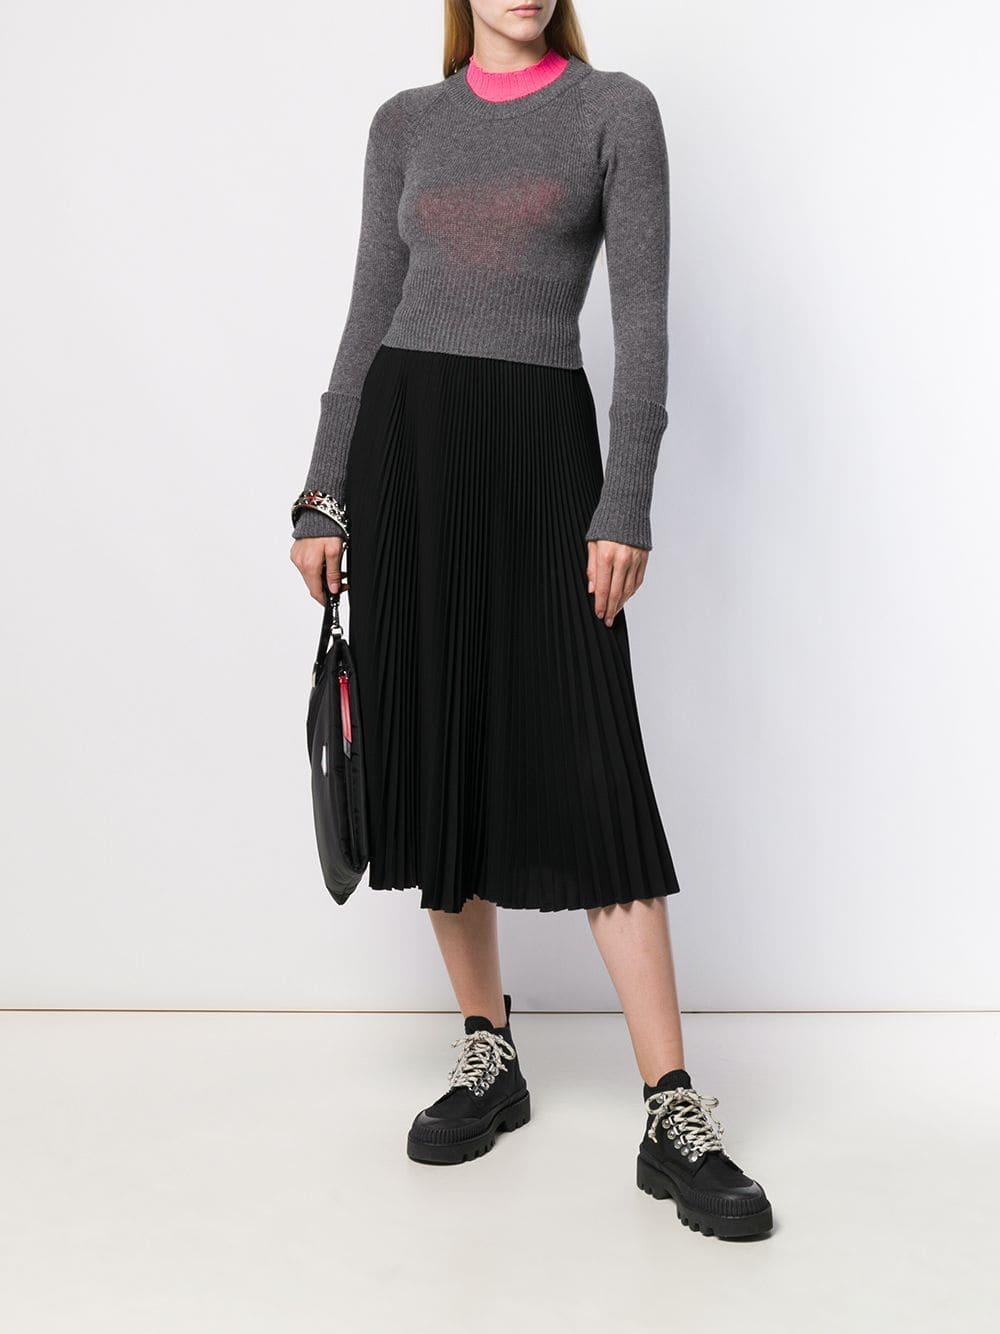 Prada Cropped Knit Cashmere Top in Grey (Gray) - Lyst